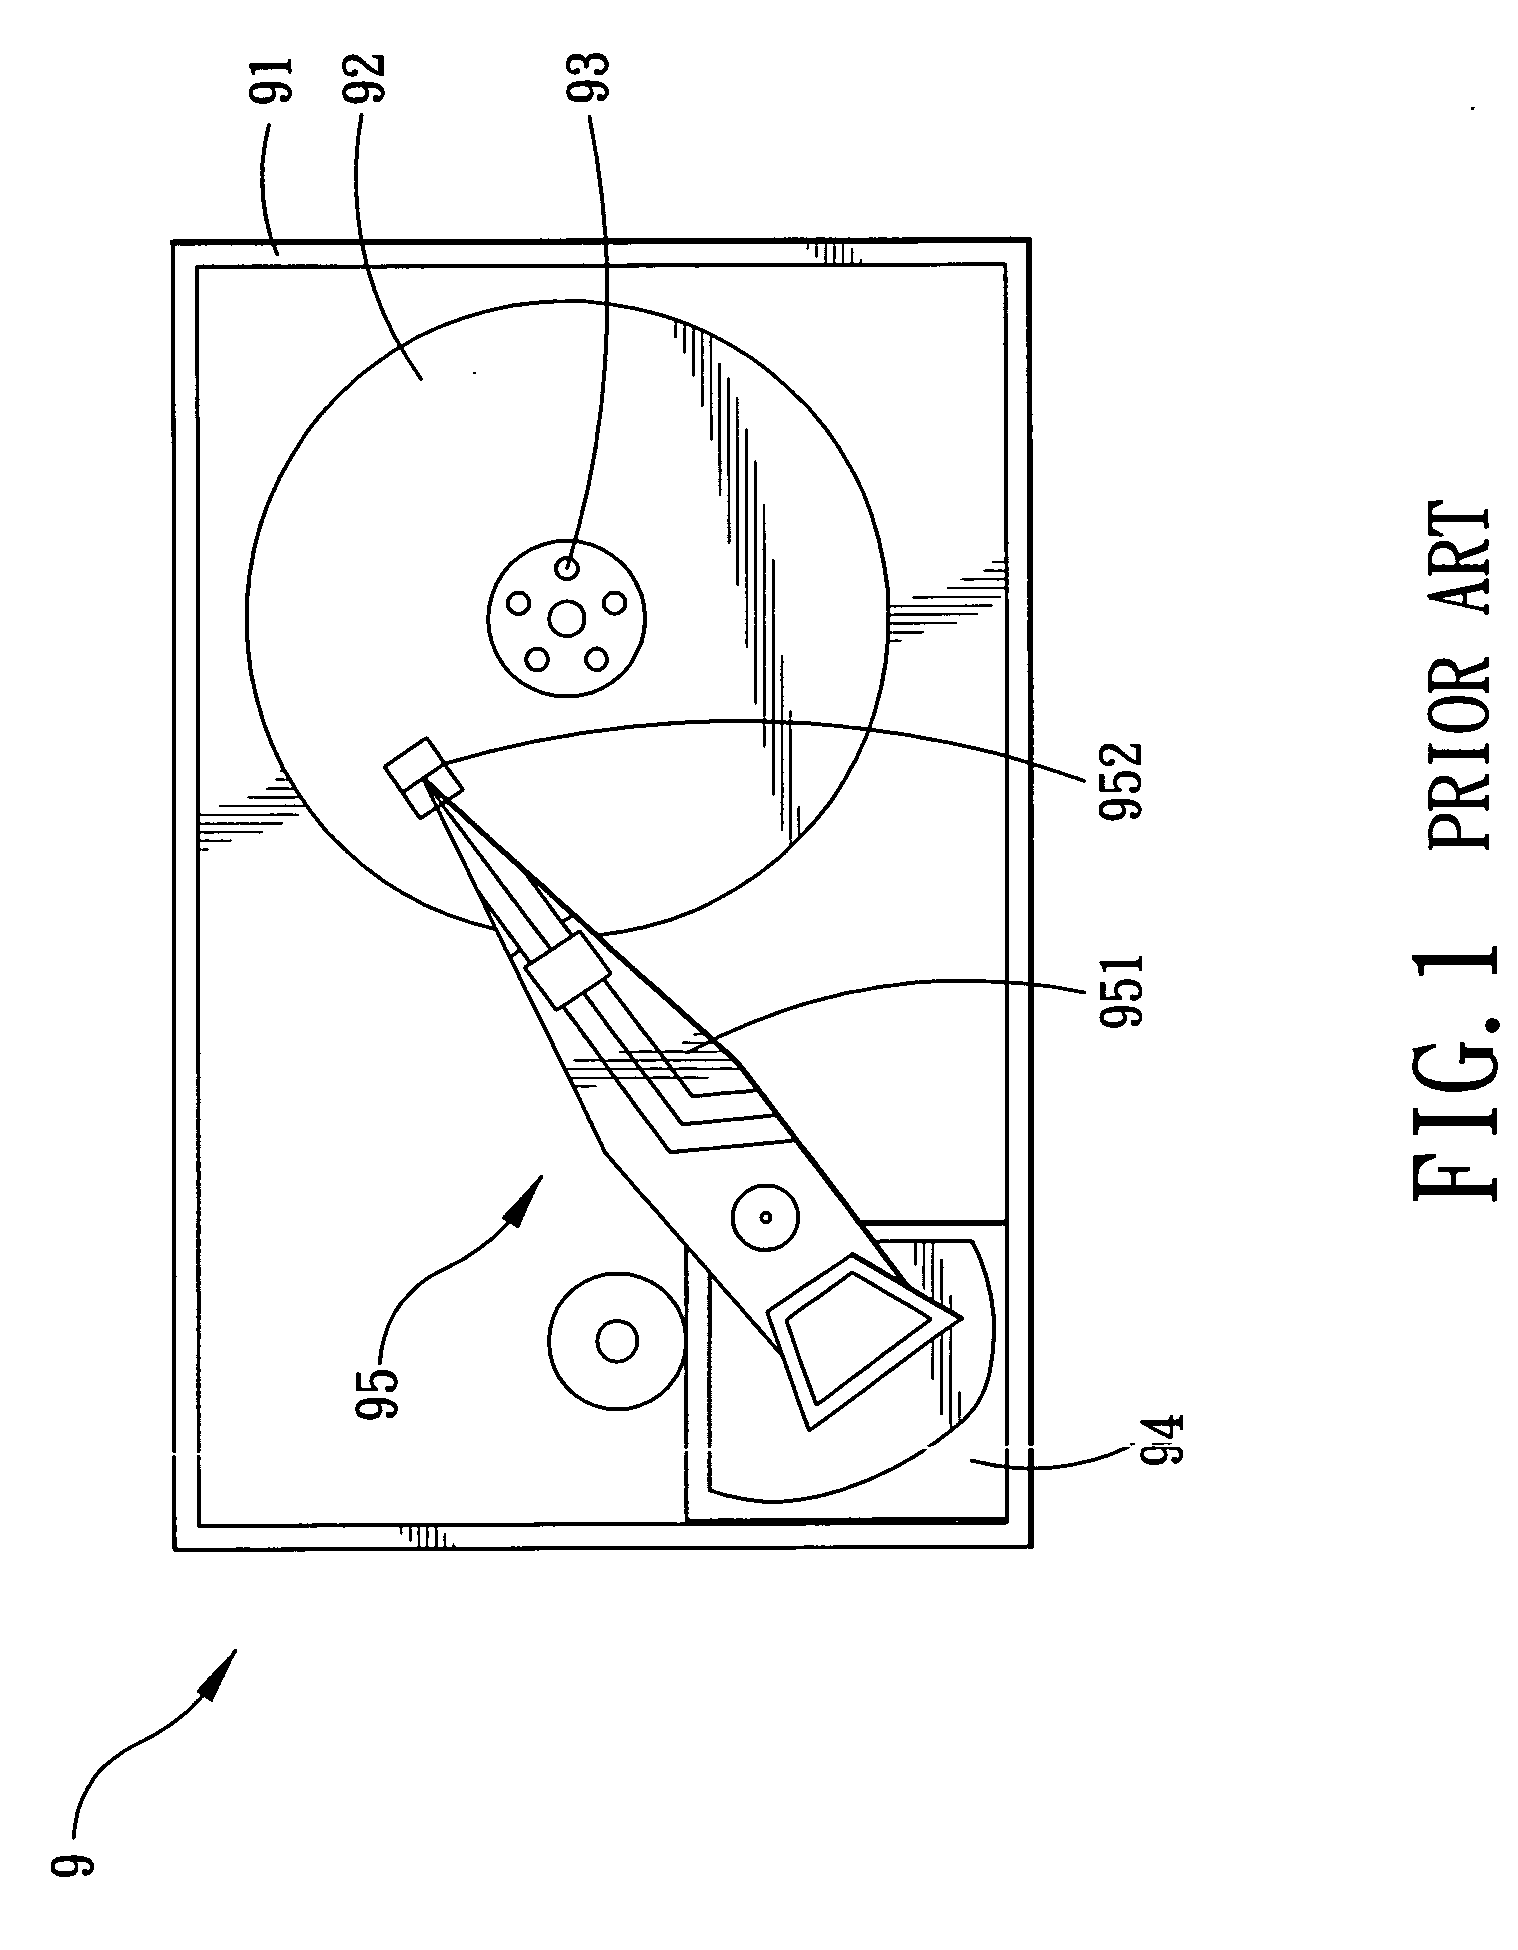 Shock-resistant magnetic storage medium for a portable electronic device